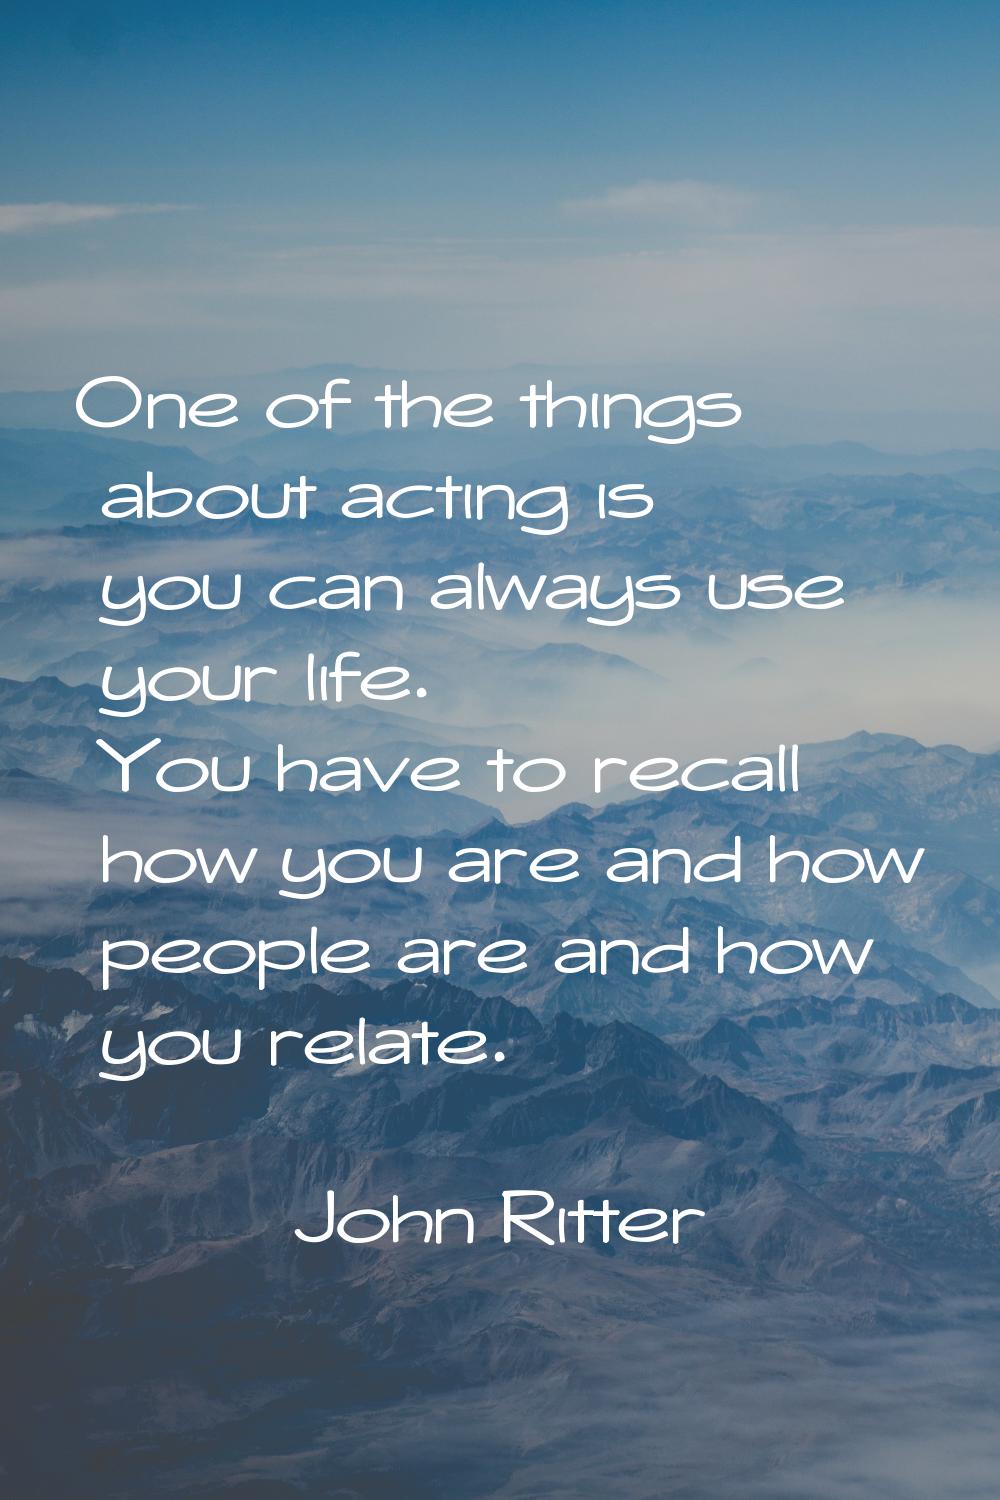 One of the things about acting is you can always use your life. You have to recall how you are and 